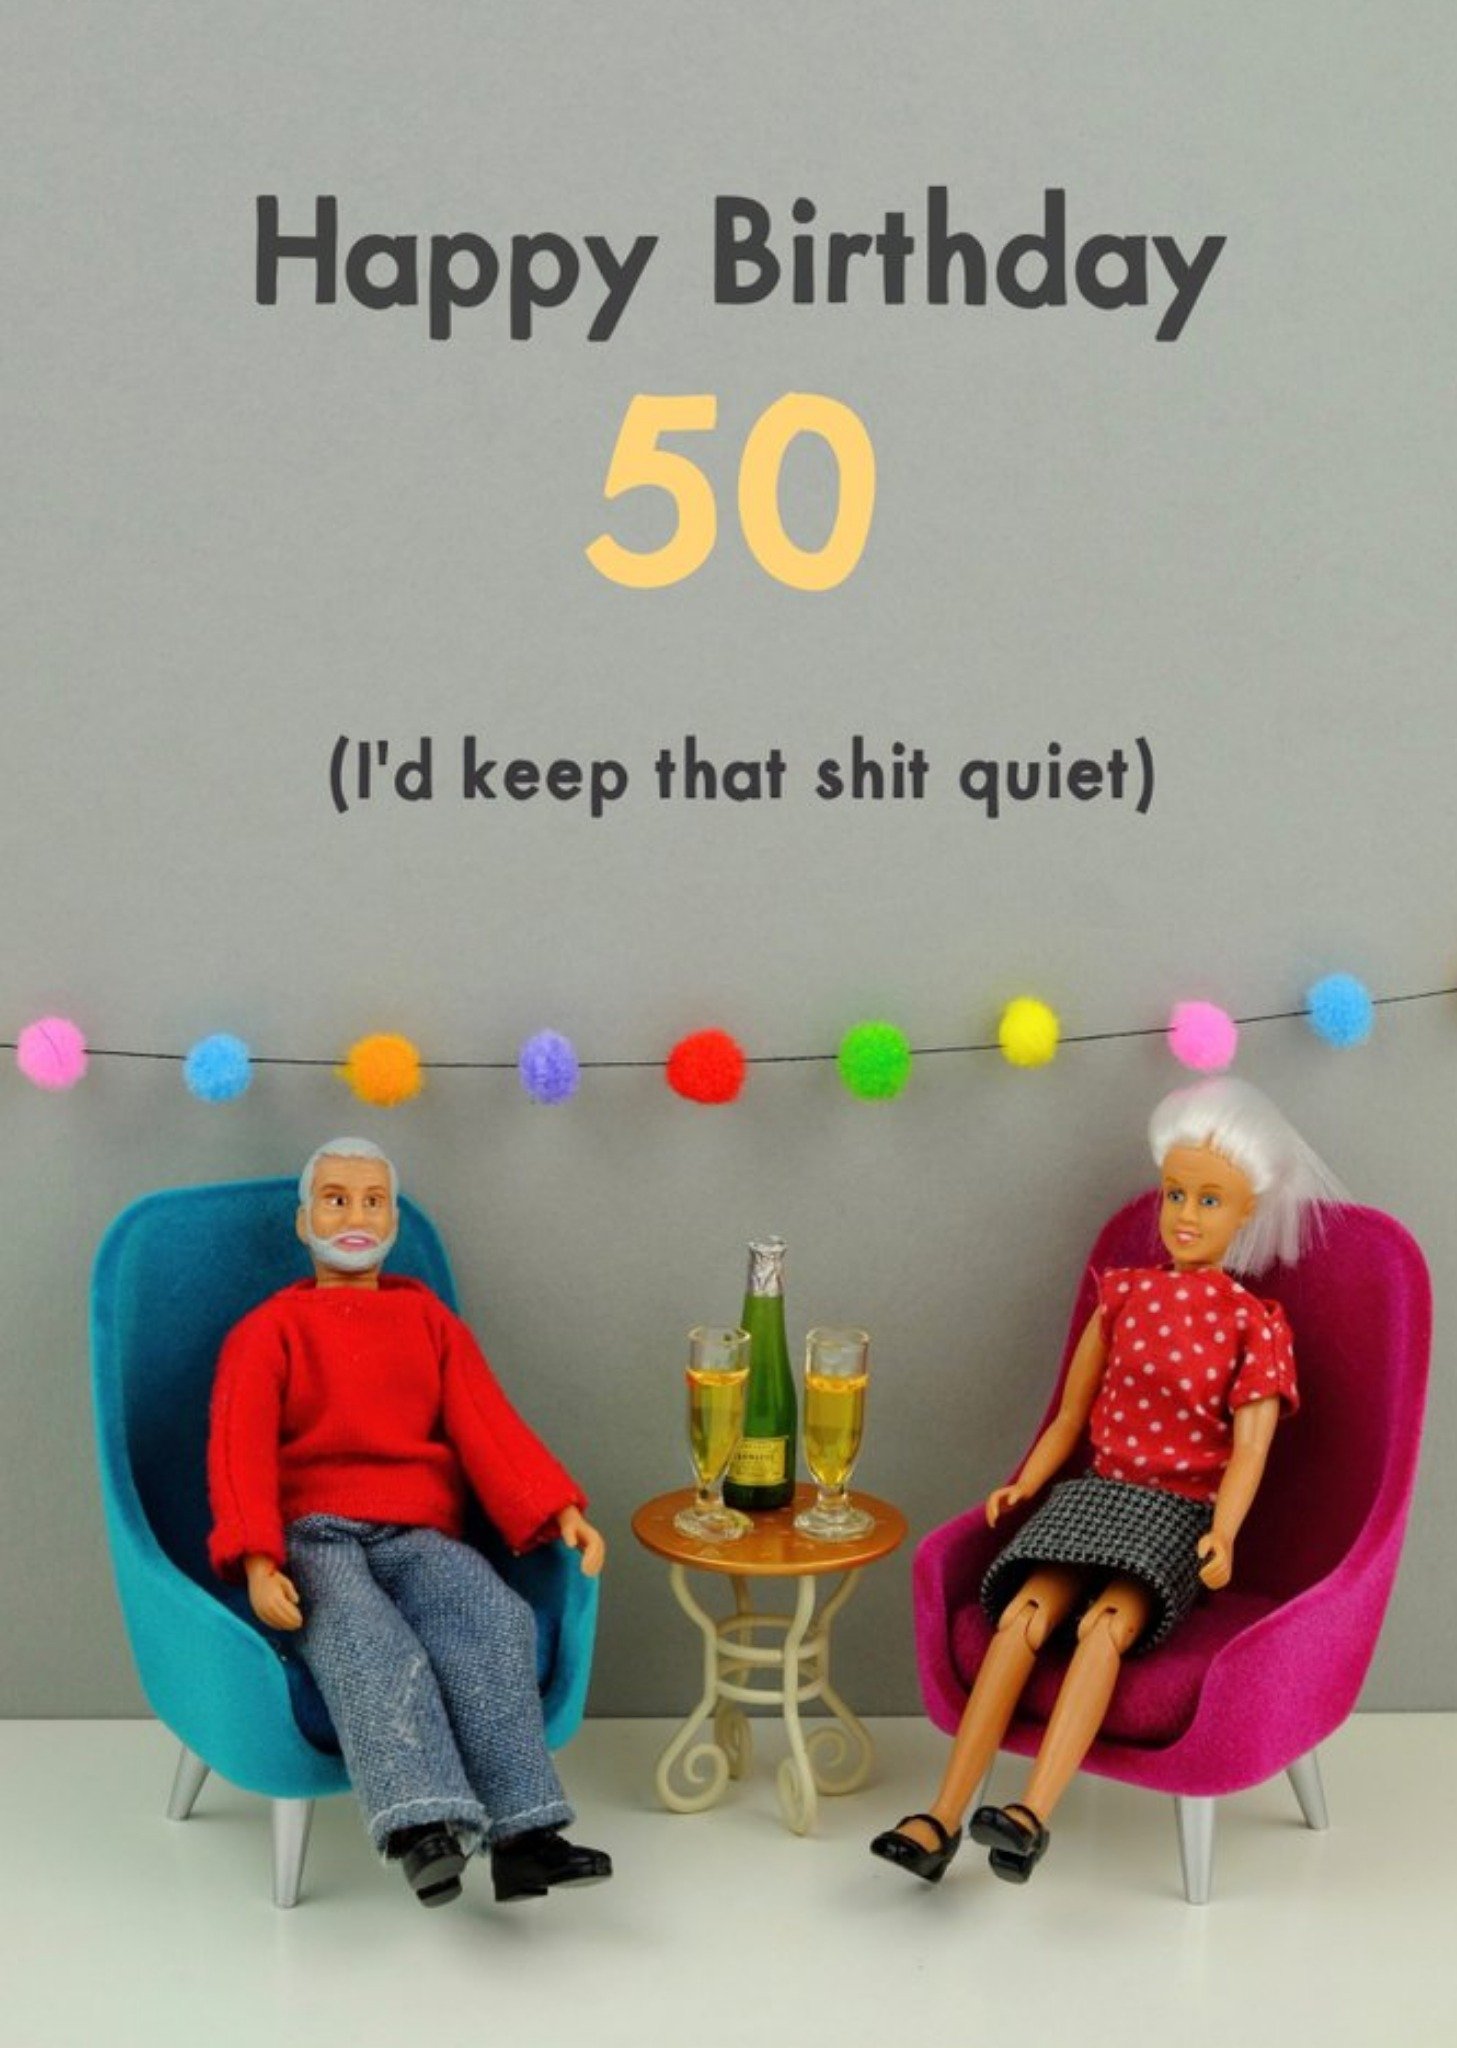 Bold And Bright Funny Dolls 50 I'd Keep That Quiet Birthday Card, Large